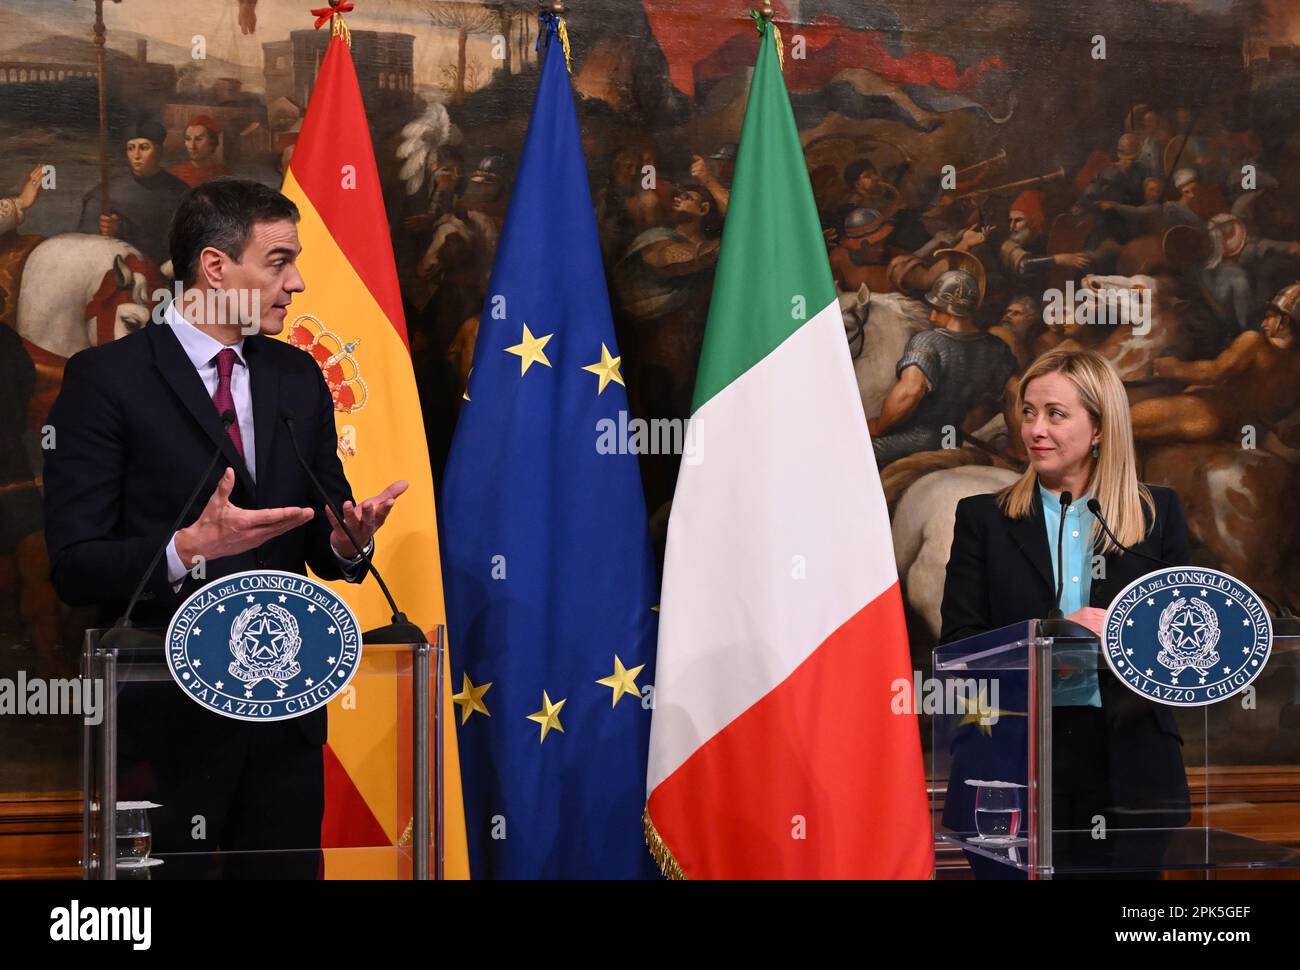 Rome, Italy. 5th Apr, 2023. Italian Prime Minister Giorgia Meloni (R) and Spanish Prime Minister Pedro Sanchez attend a press conference in Rome, Italy, on April 5, 2023. Spanish Prime Minister Pedro Sanchez and his Italian counterpart Giorgia Meloni met here on Wednesday for talks that covered migration, energy supply and the European Union's rules on public debt. Credit: Alberto Lingria/Xinhua/Alamy Live News Stock Photo